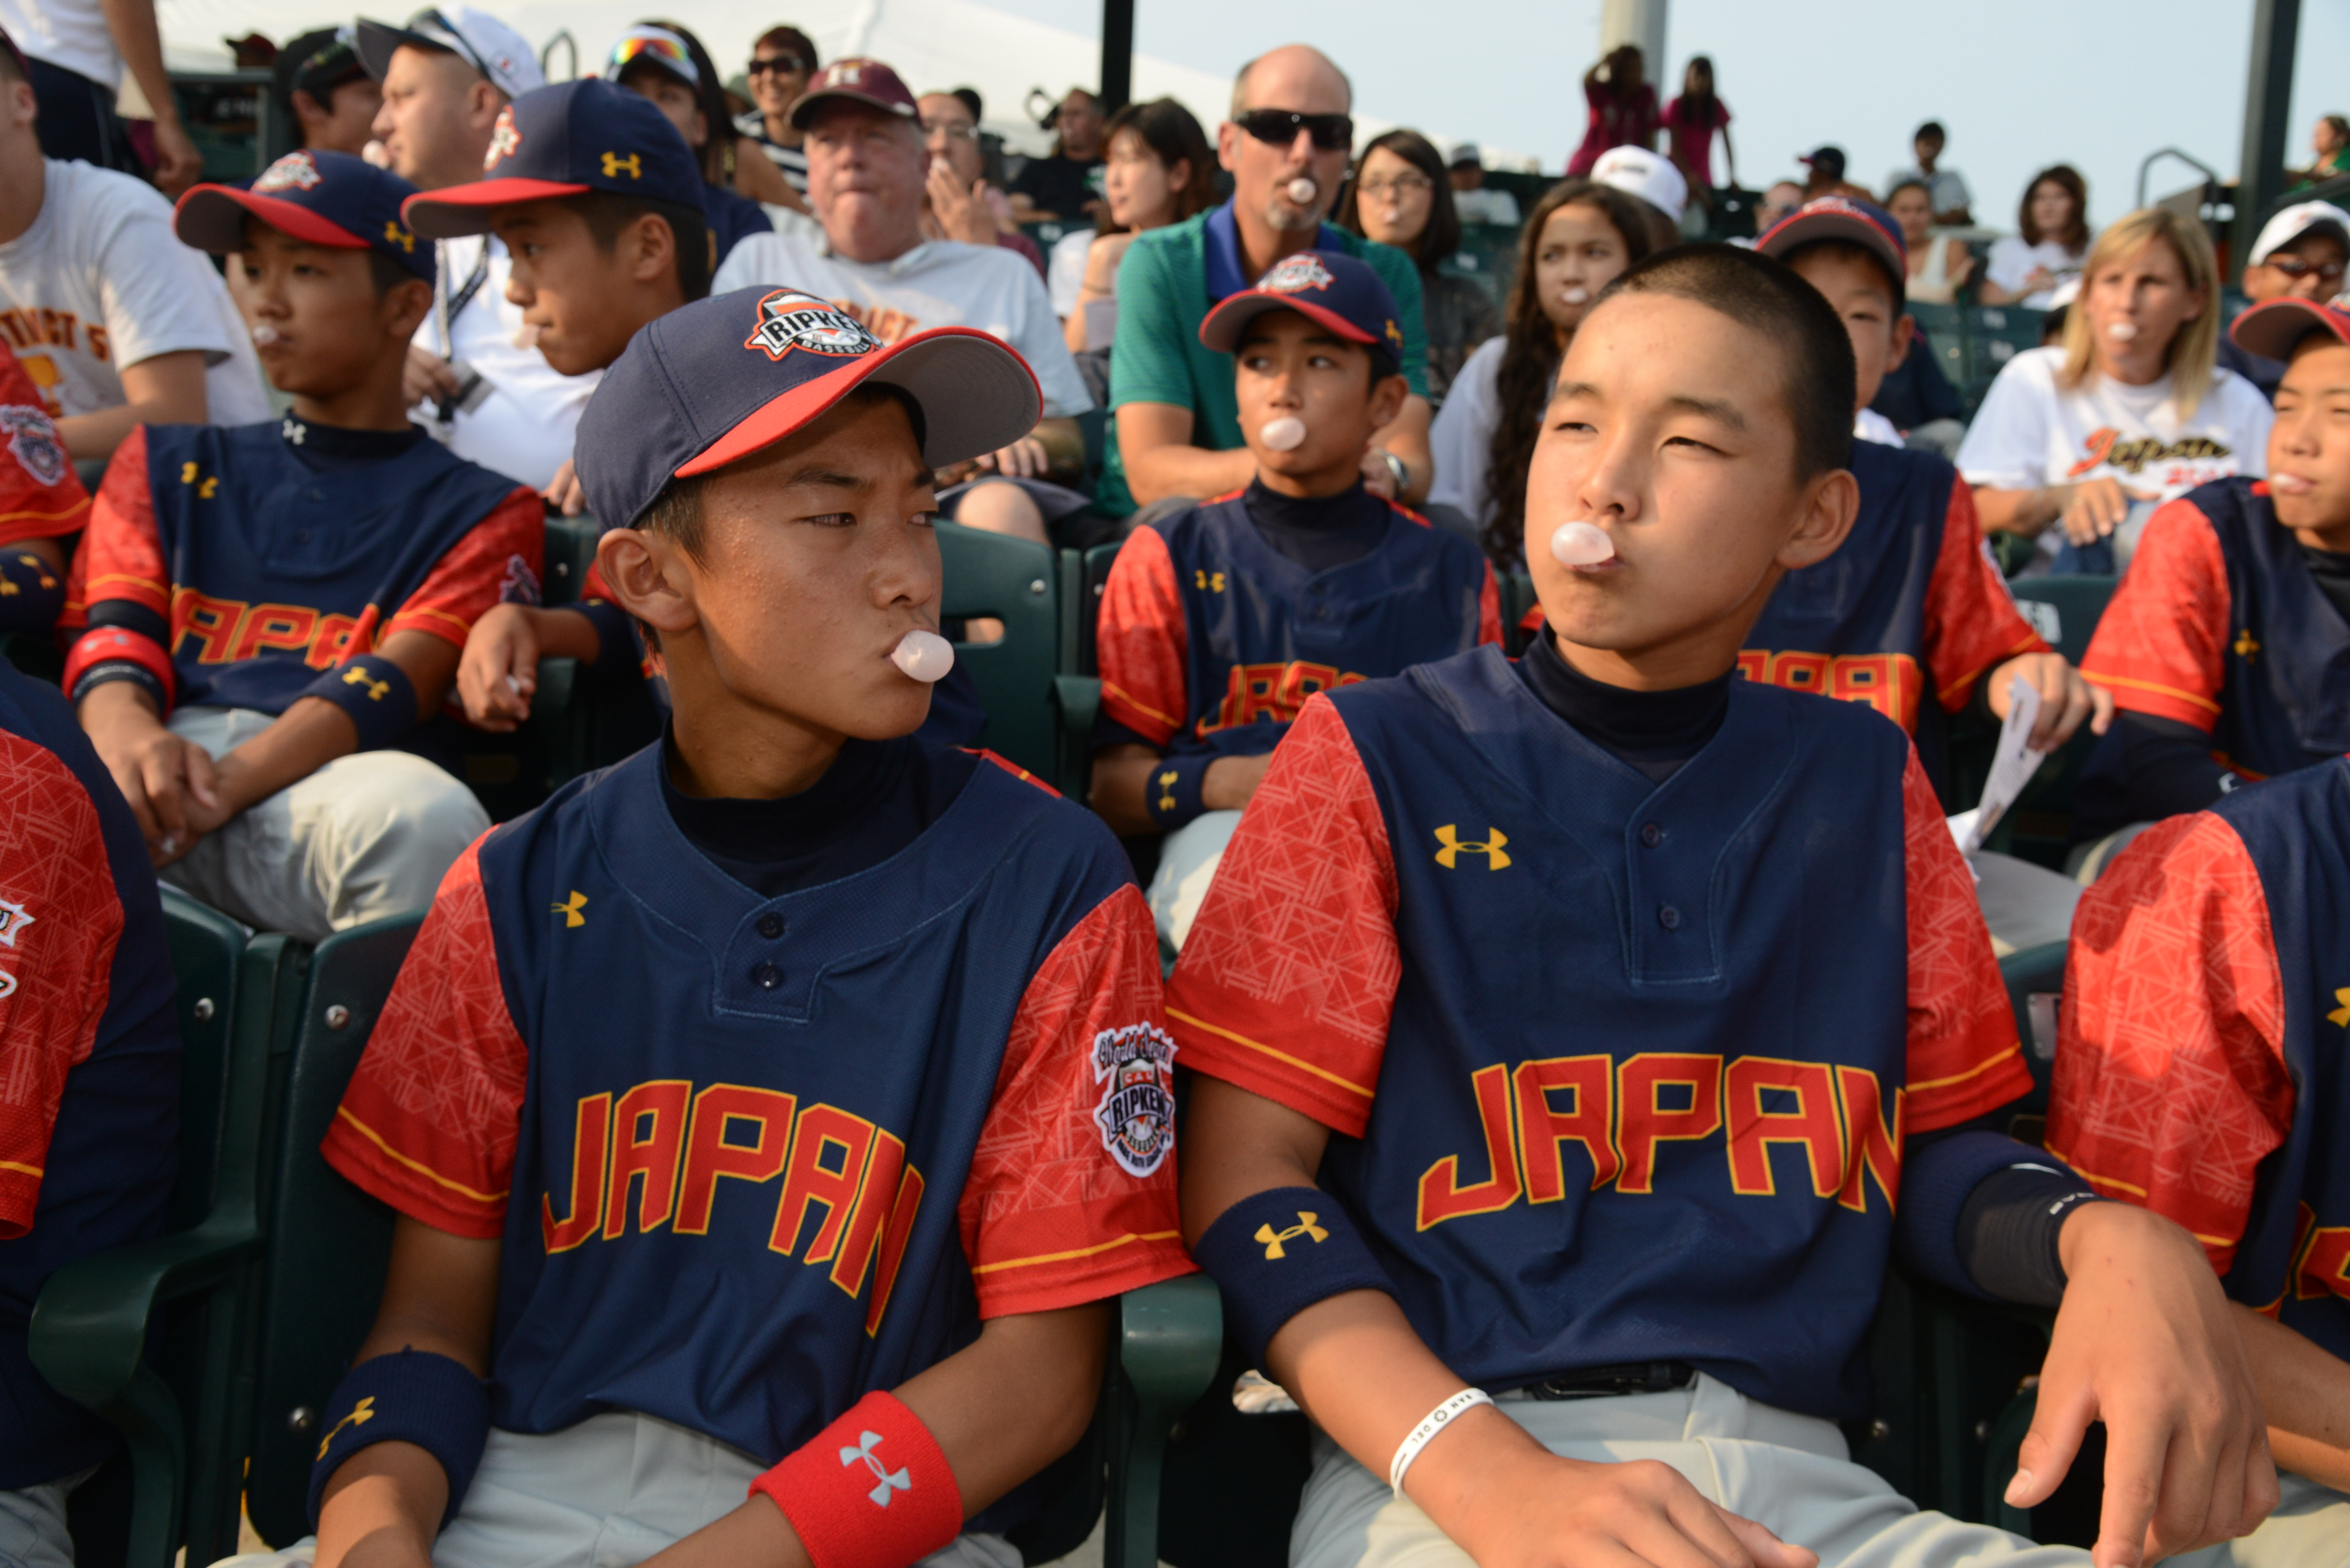 At the opening ceremonies of the Cal Ripken World Series, the defending championship team from Japan helps Big League Chew Bubble Gum achieve a GUINNESS WORLD RECORDS® official title.